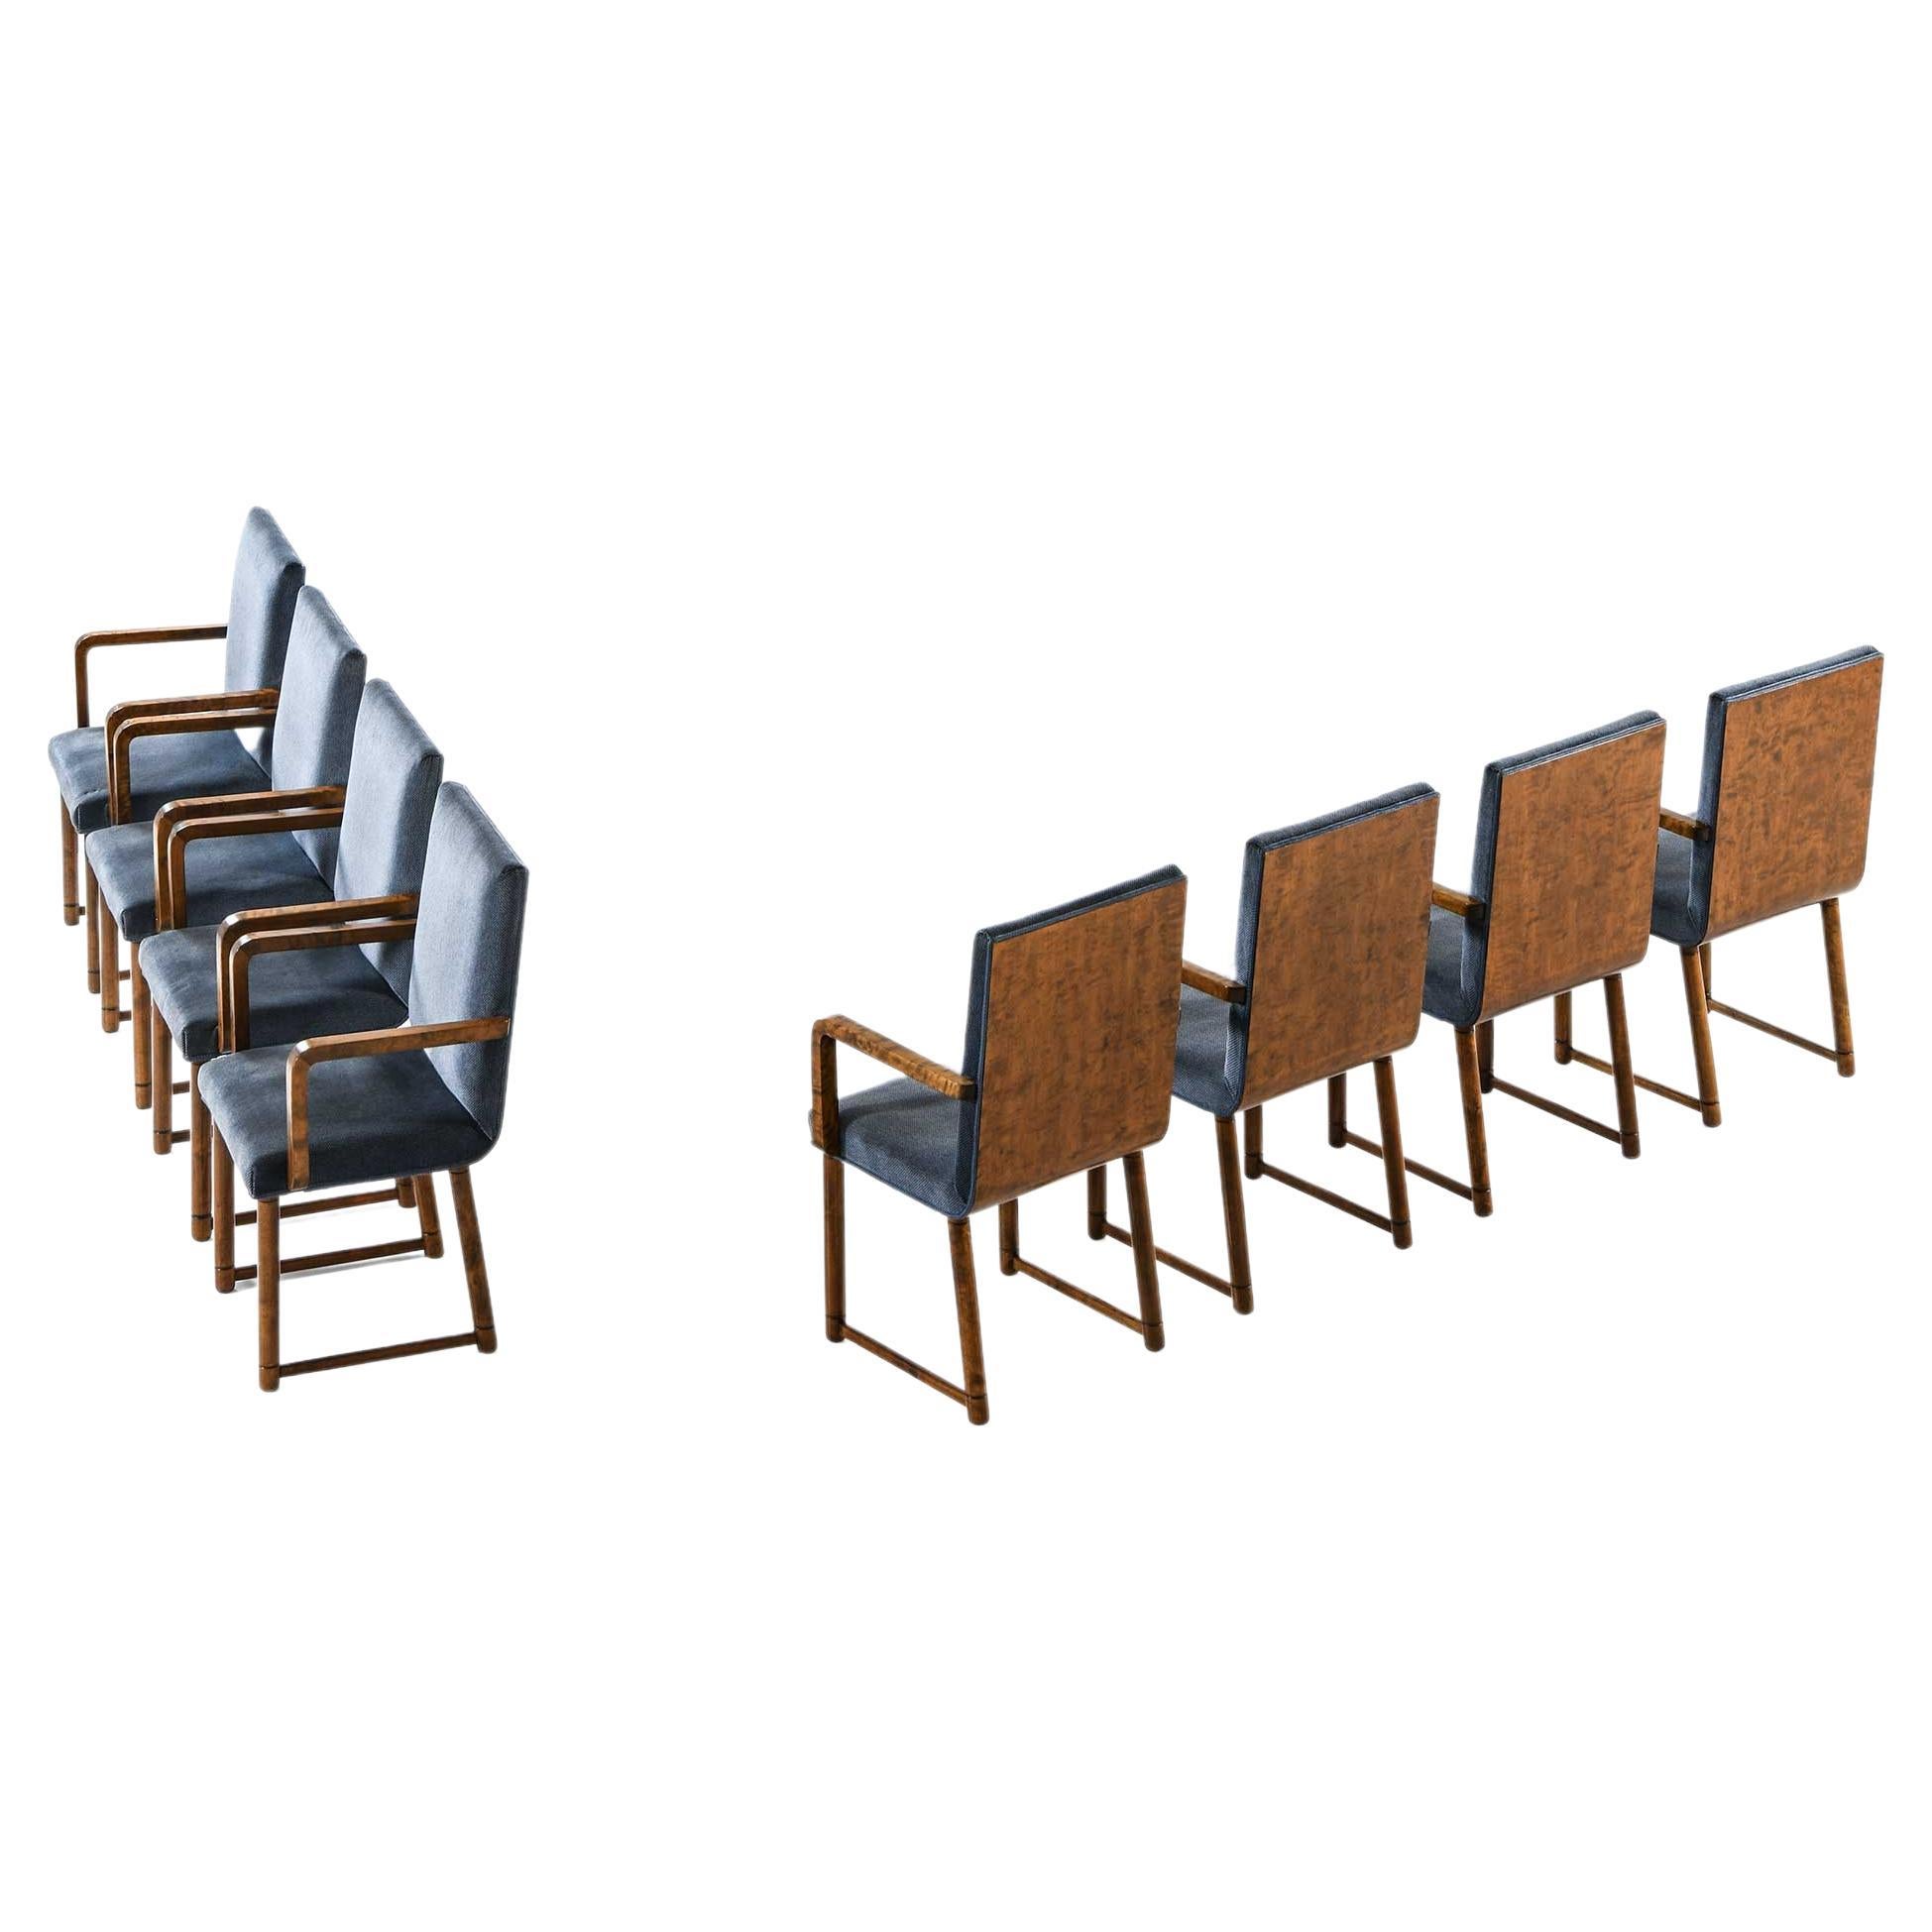 Set of 8 armchairs produced in 1930's in Finland